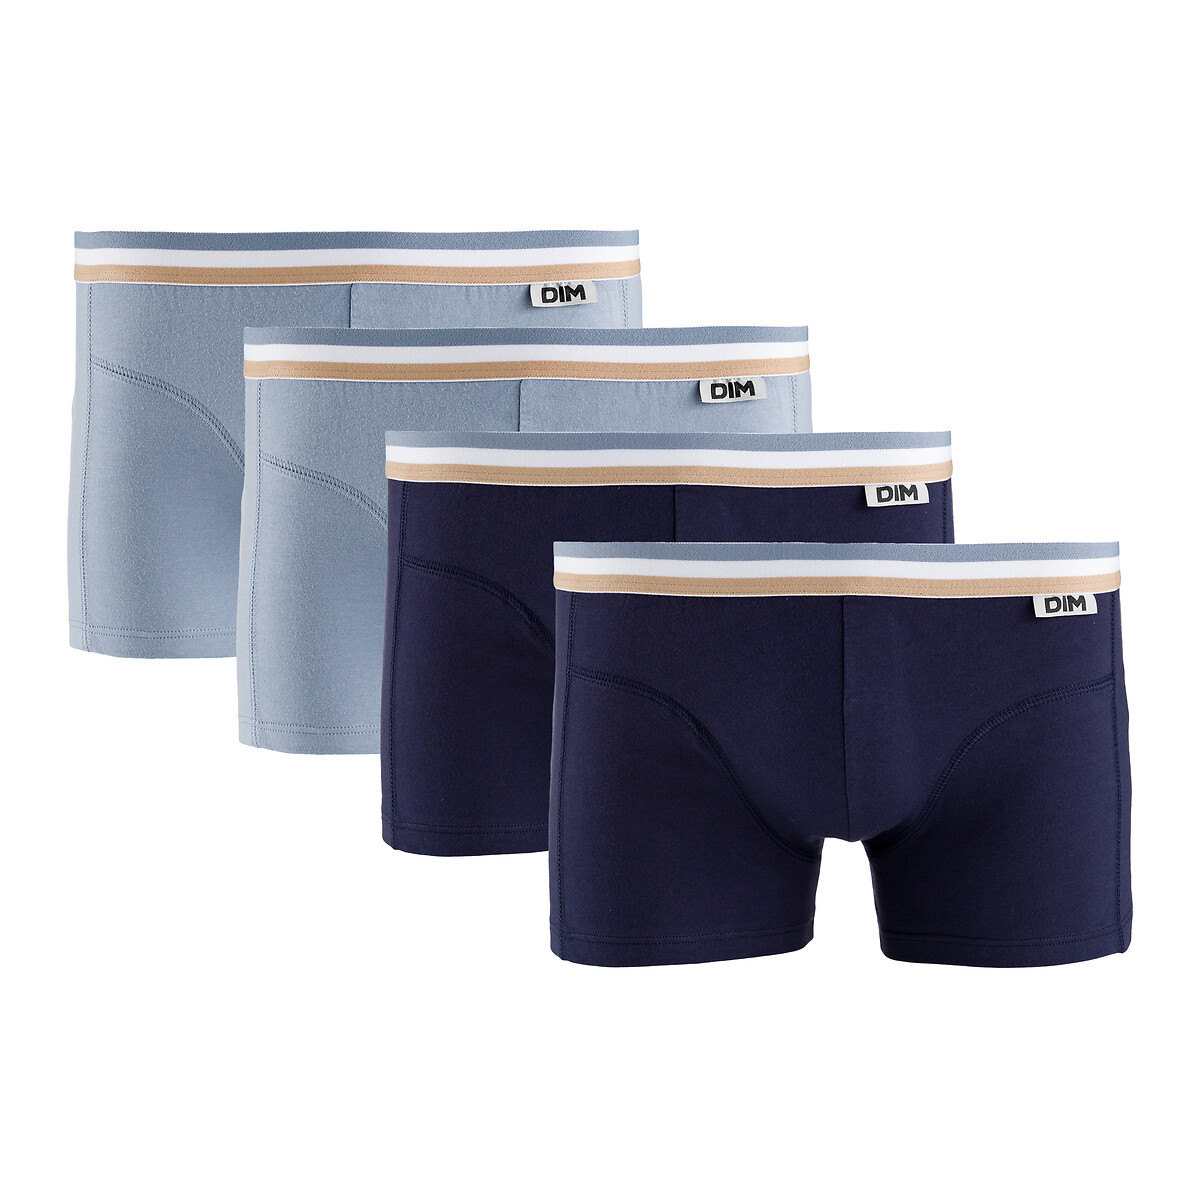 Pack of 4 Ecodim Hipsters in Cotton